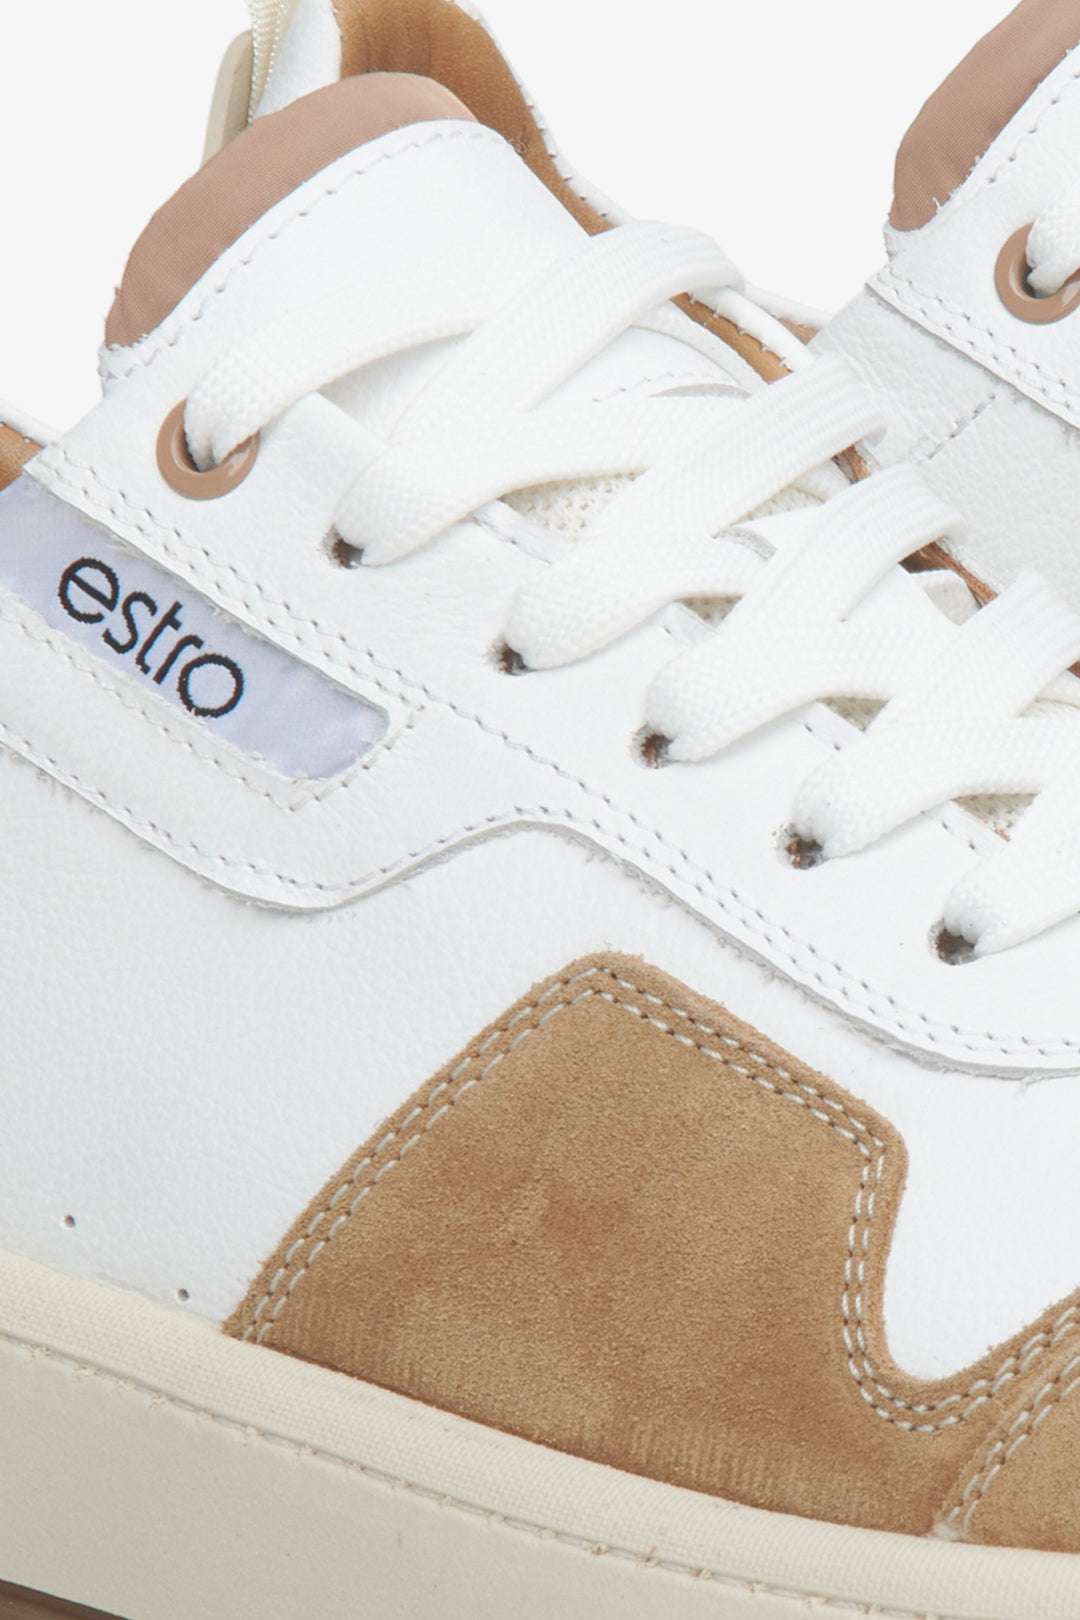 Men's leather-velour sneakers in white-brown color - close-up on details.